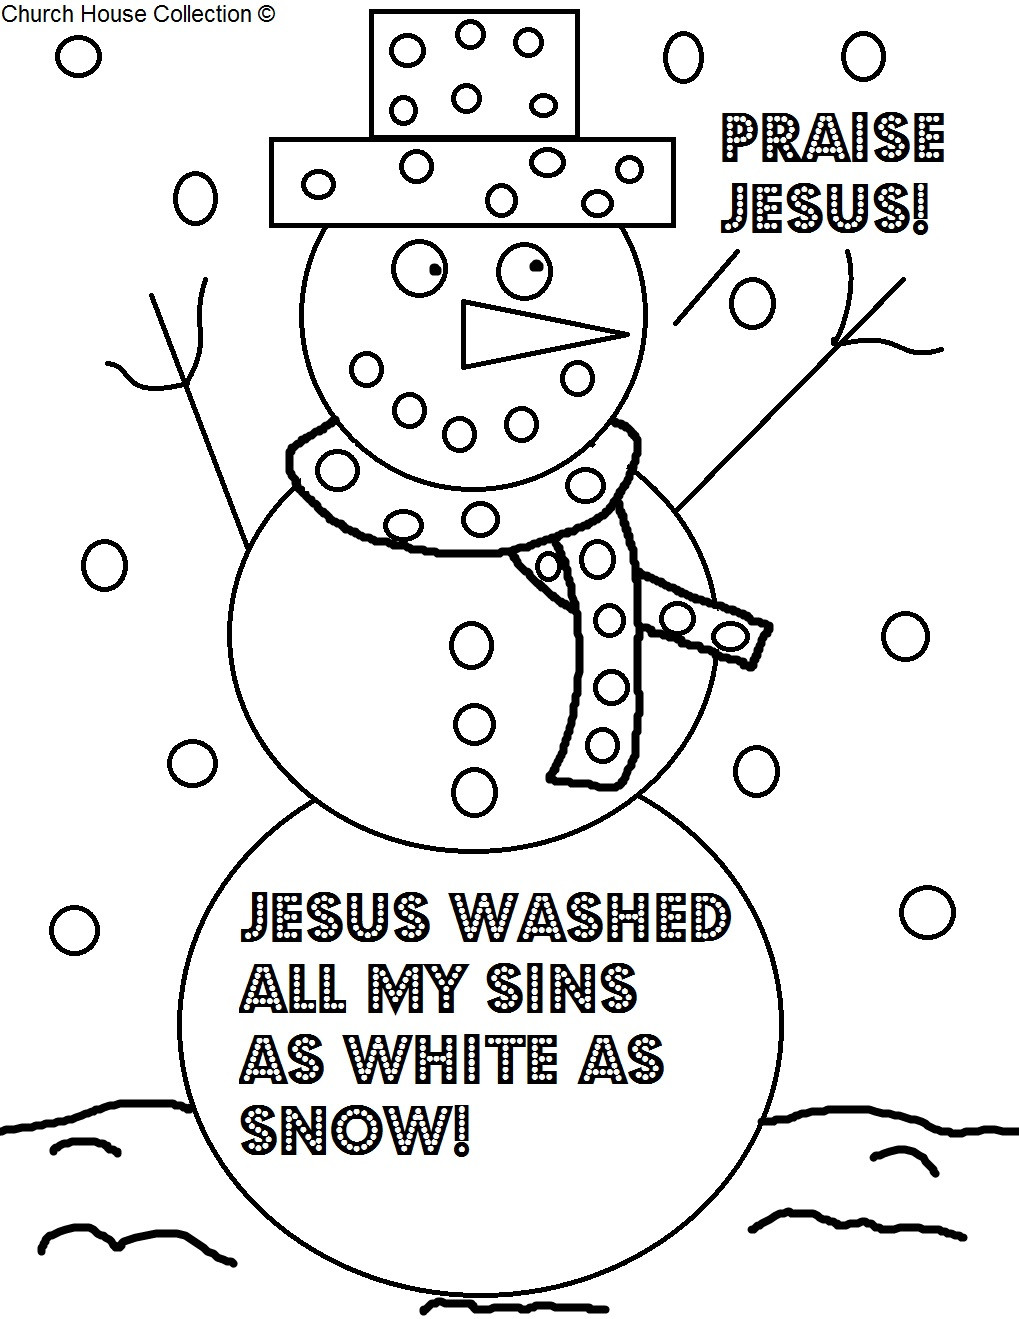 Free Printable Sunday School Coloring Pages
 Church House Collection Blog Christmas Coloring Page For